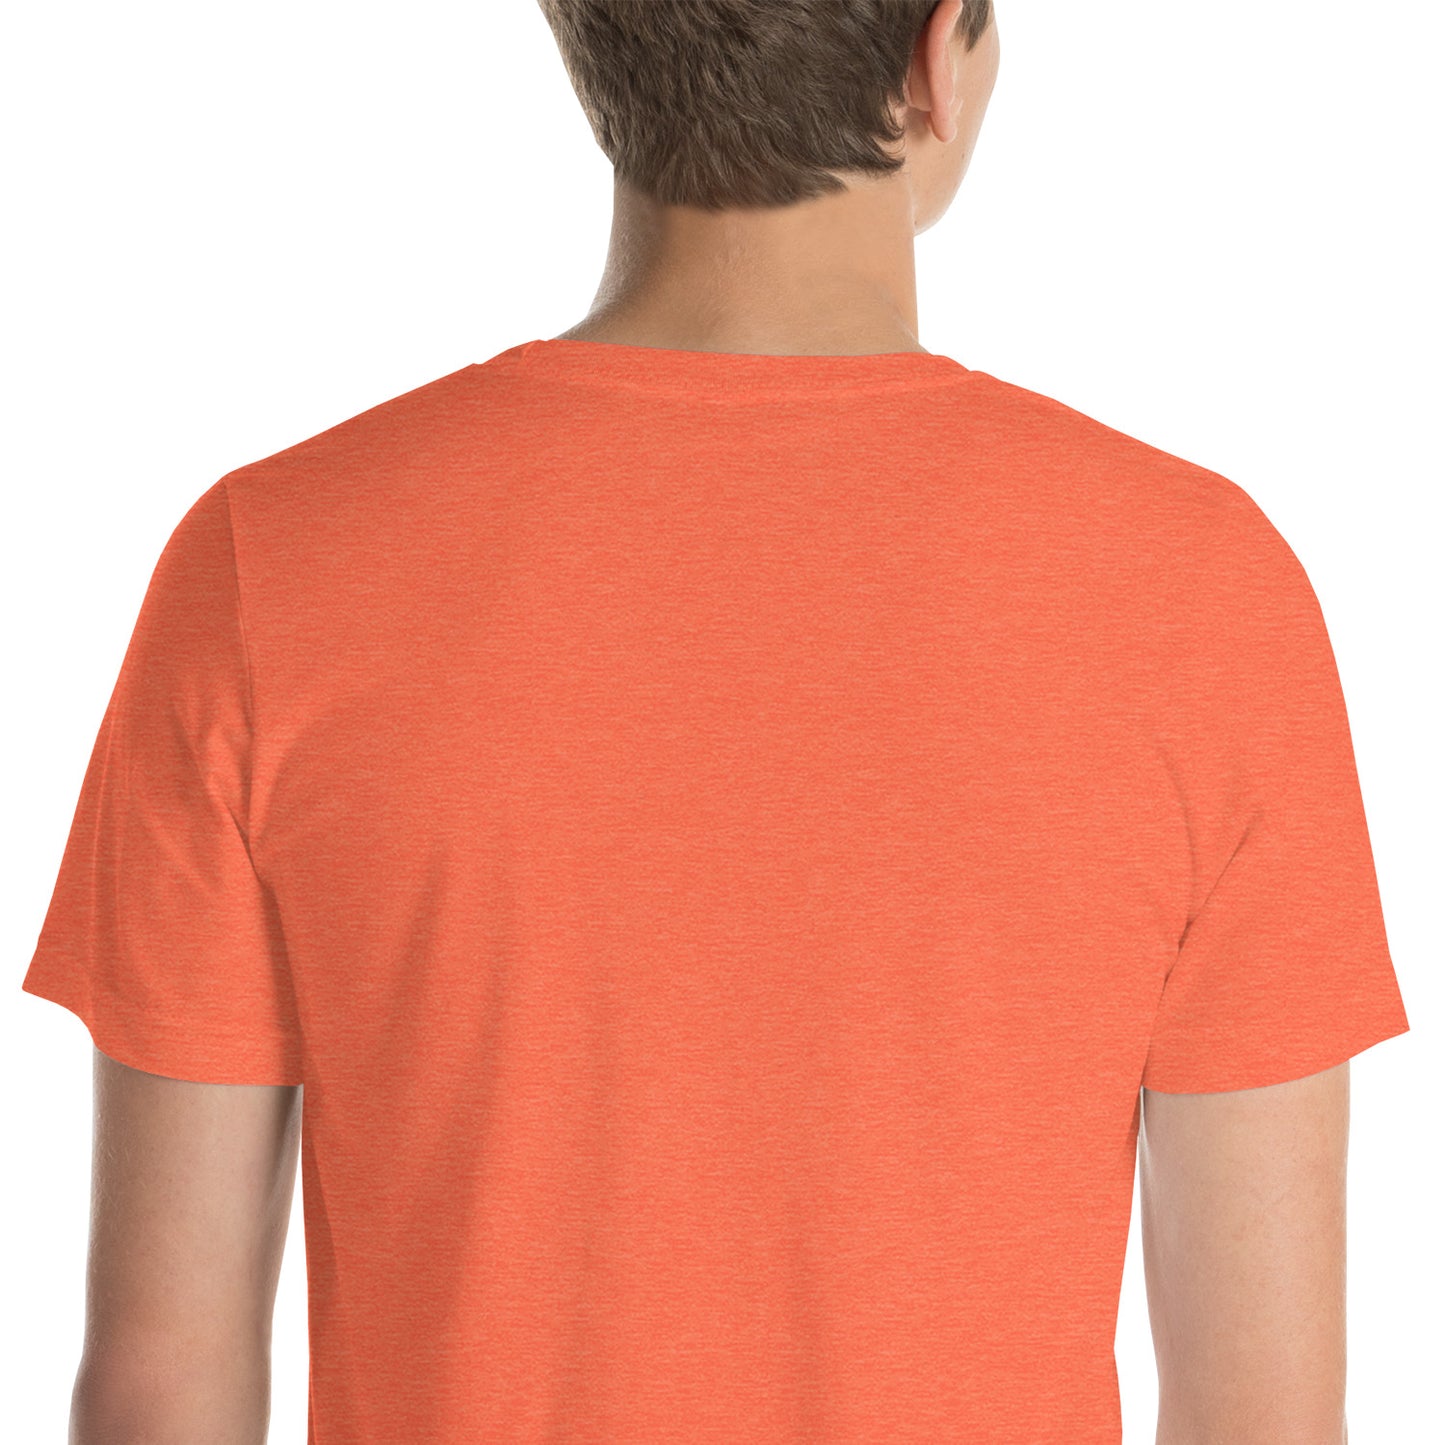 Disc Golf is for Everyone Groovy t-shirt - orange